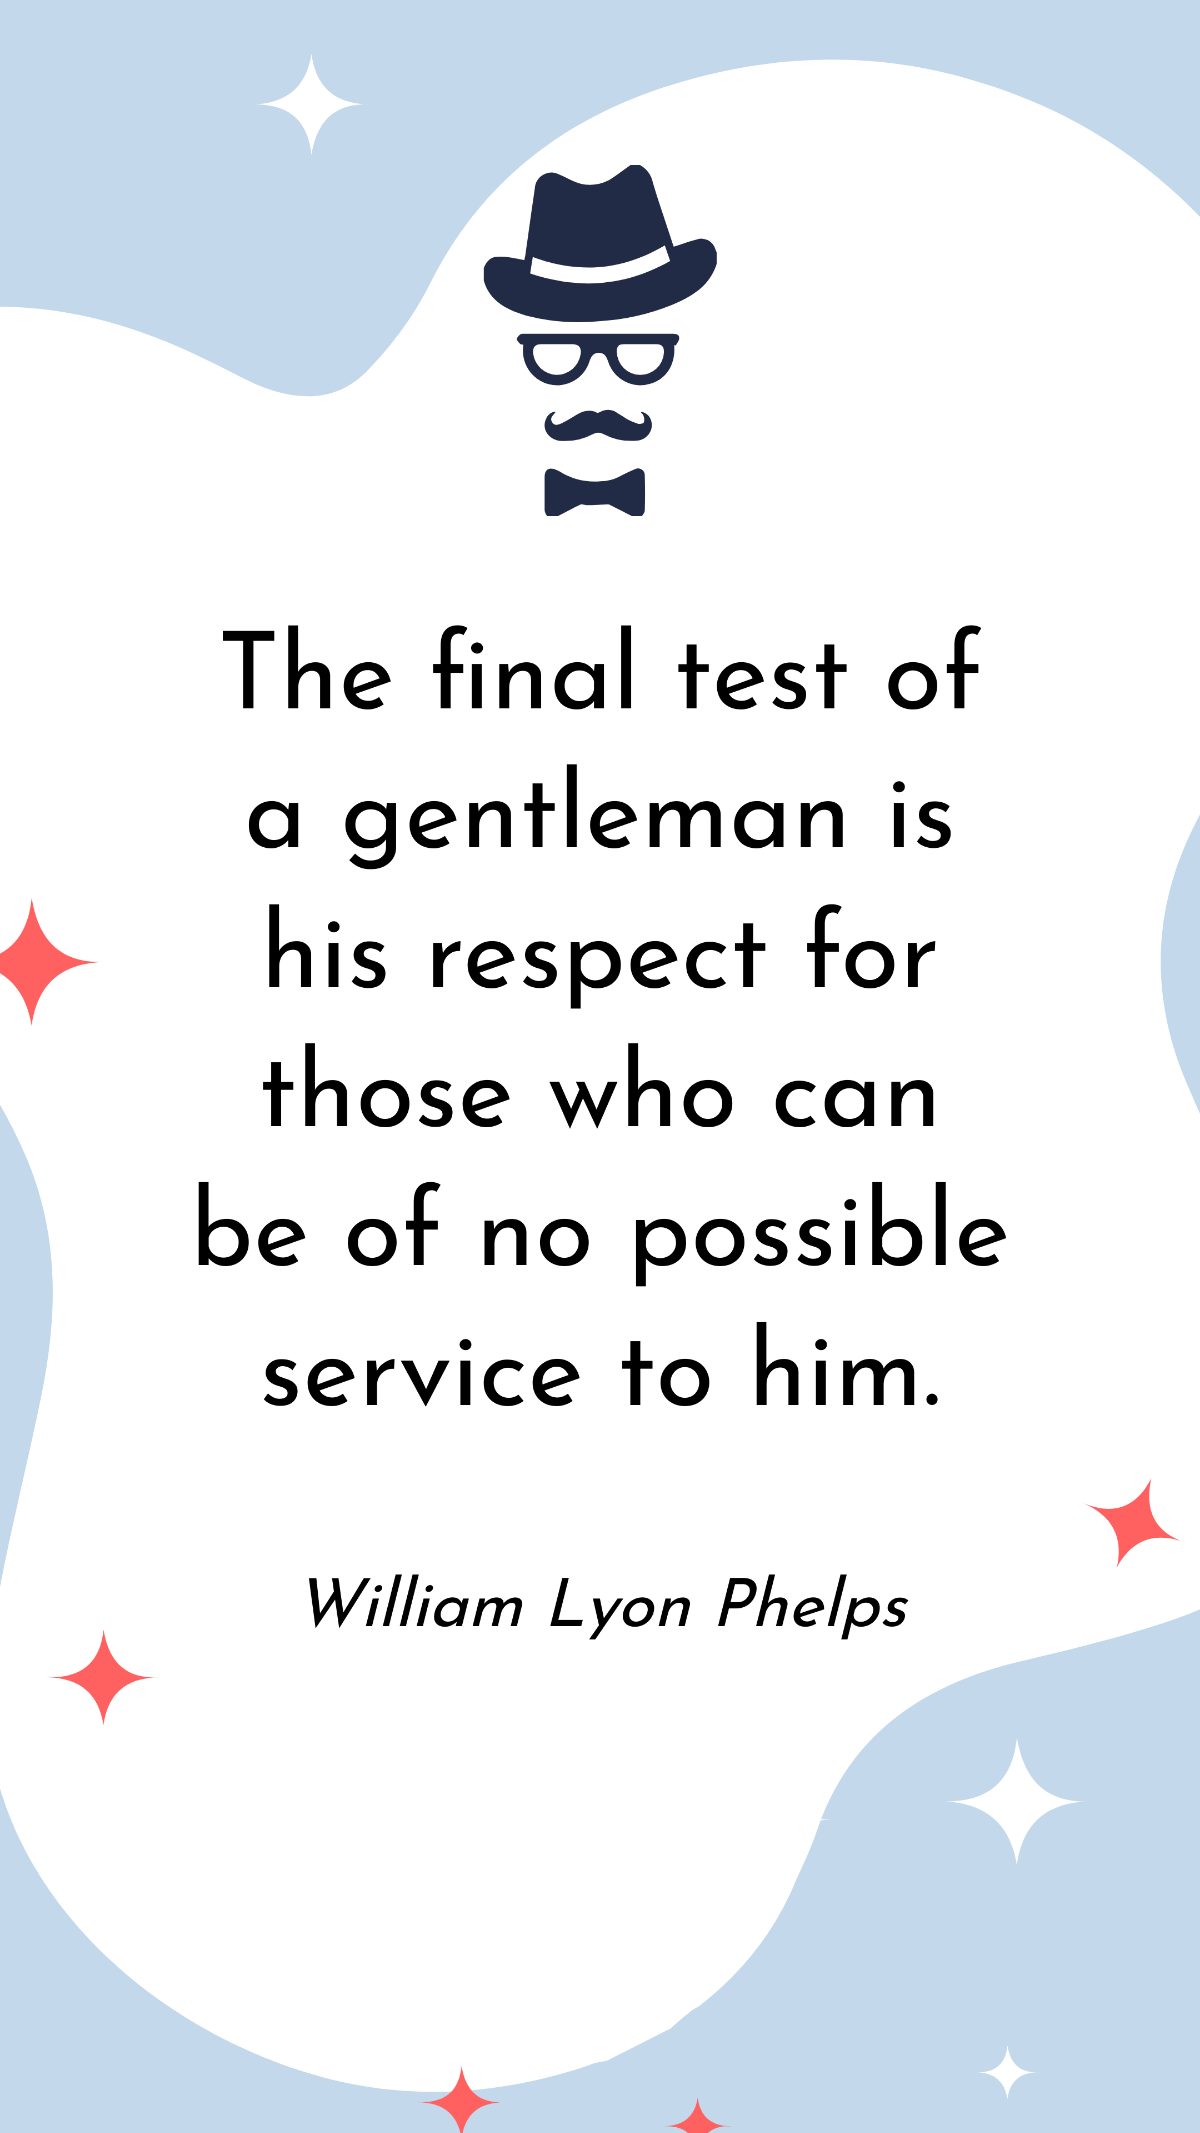 William Lyon Phelps - The final test of a gentleman is his respect for those who can be of no possible service to him. Template